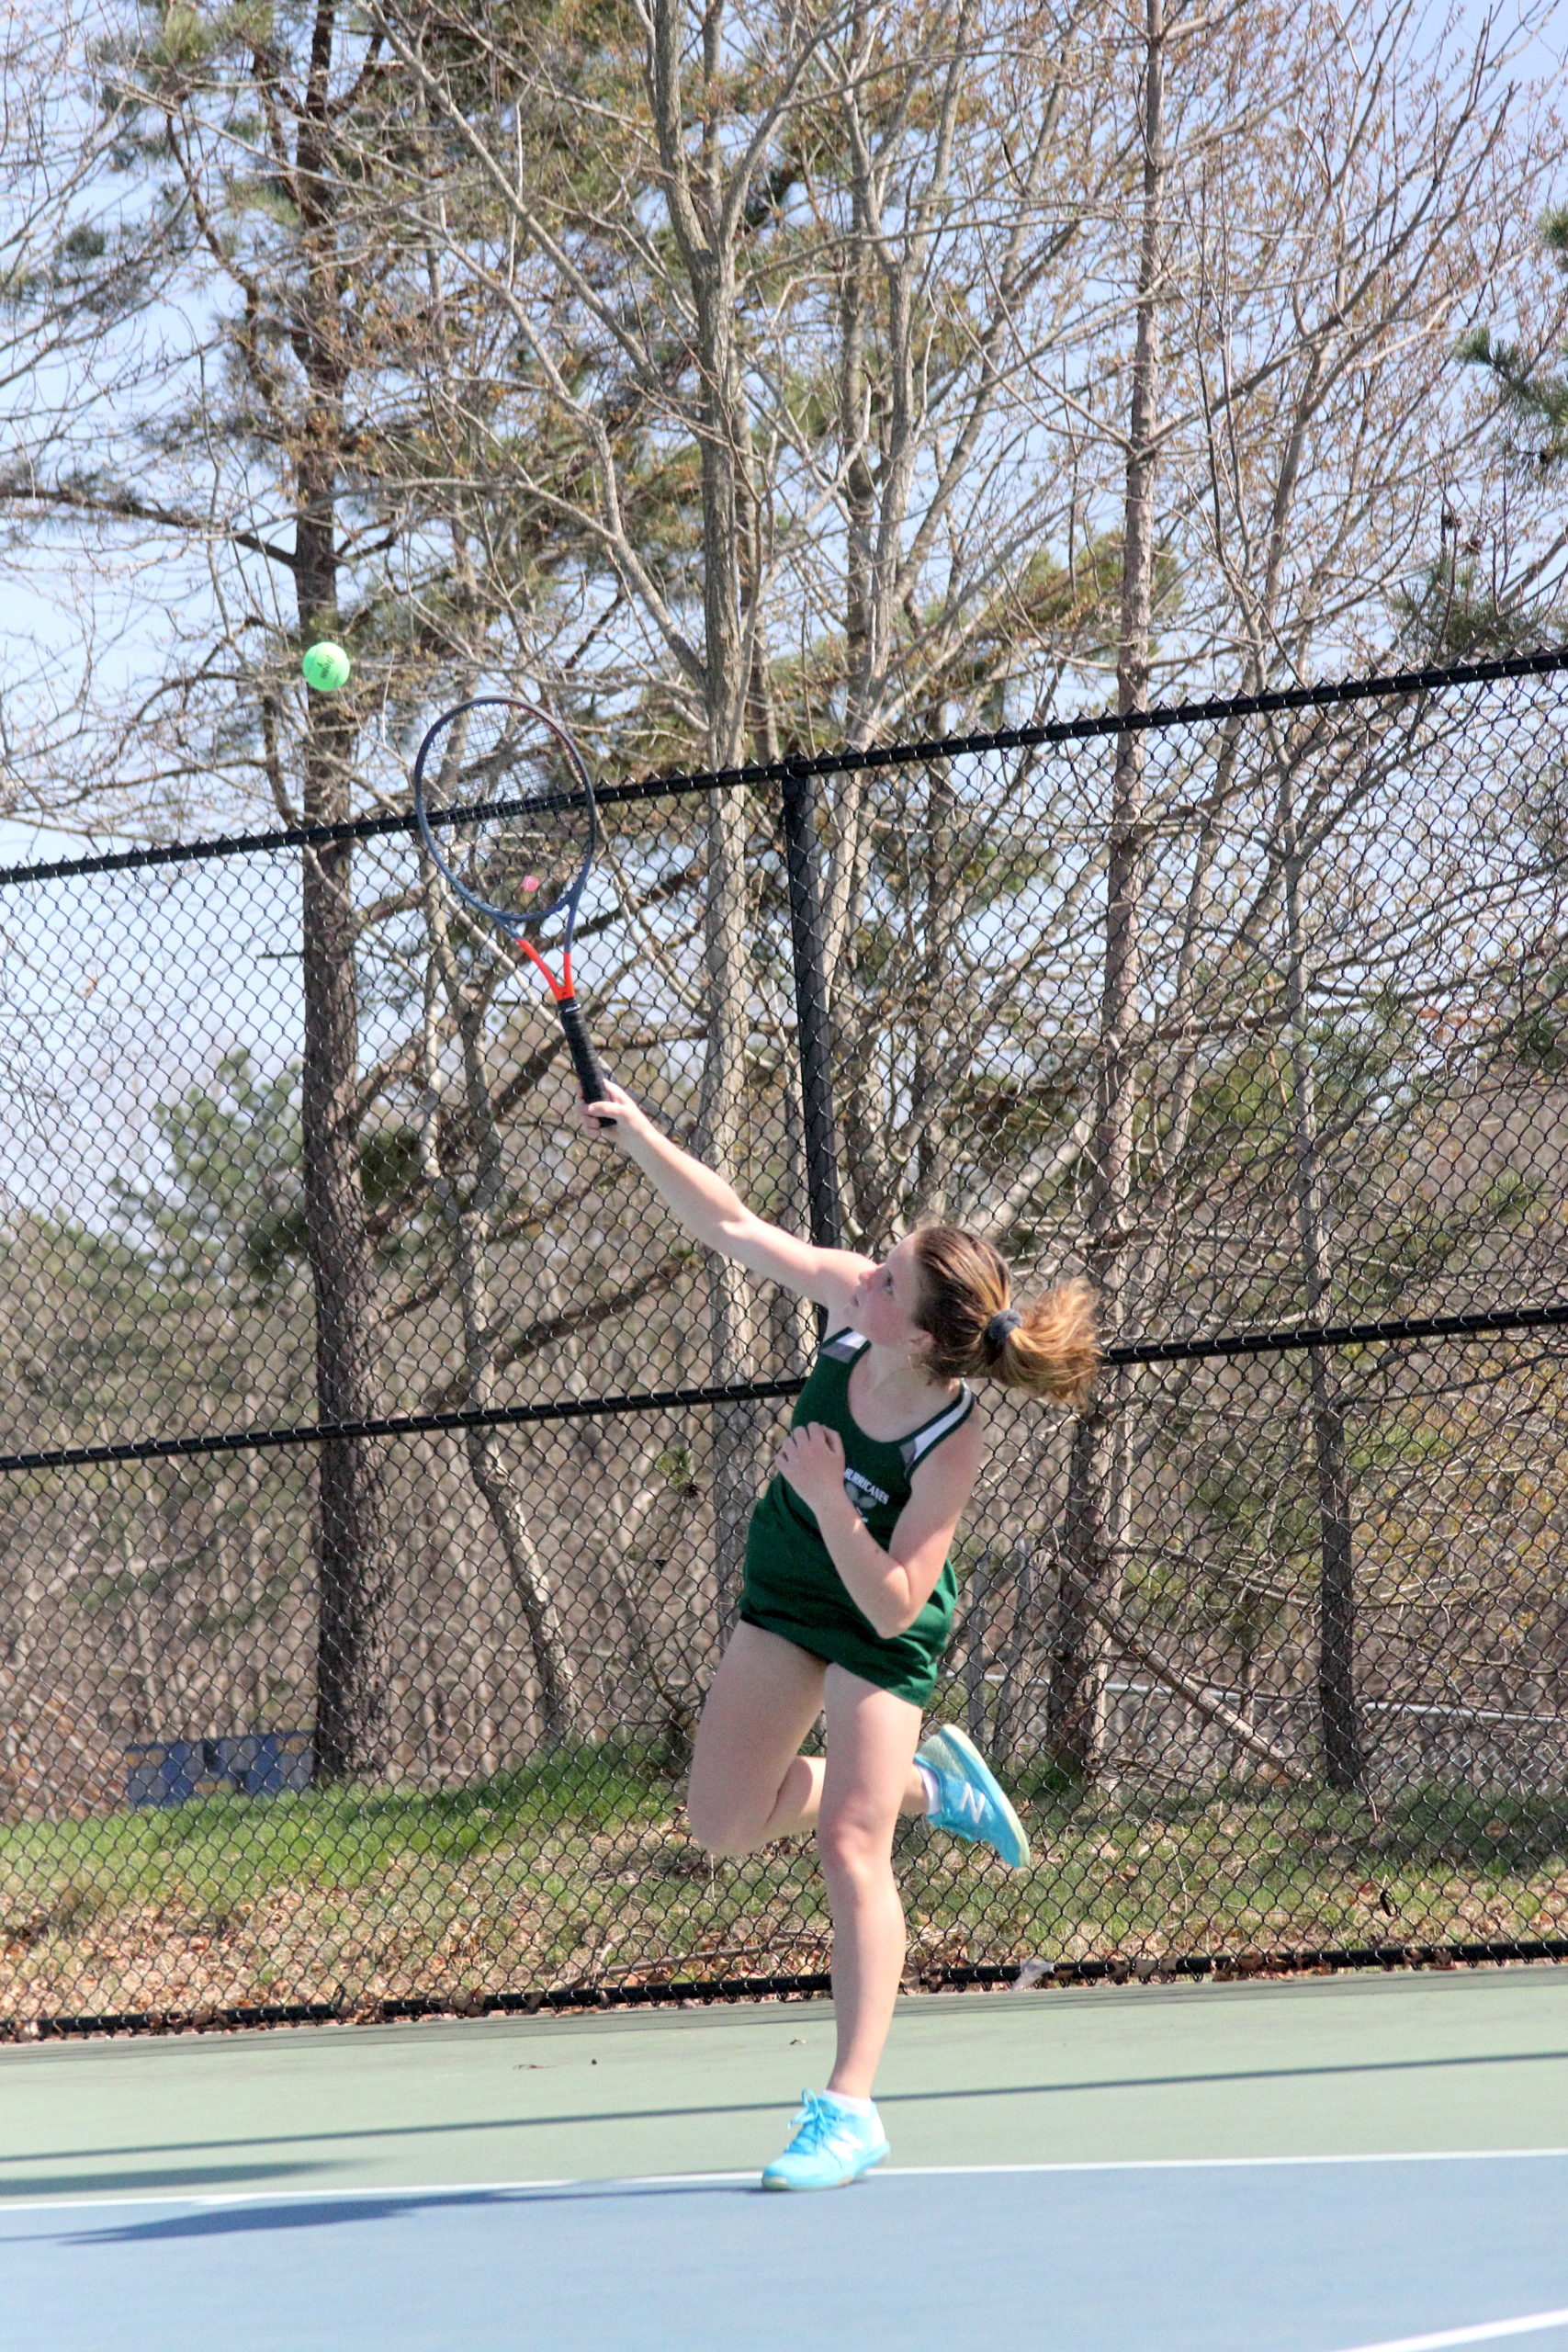 Westhampton Beach junior Katelyn Stabile serves up an ace in the Division IV doubles finals on Tuesday.